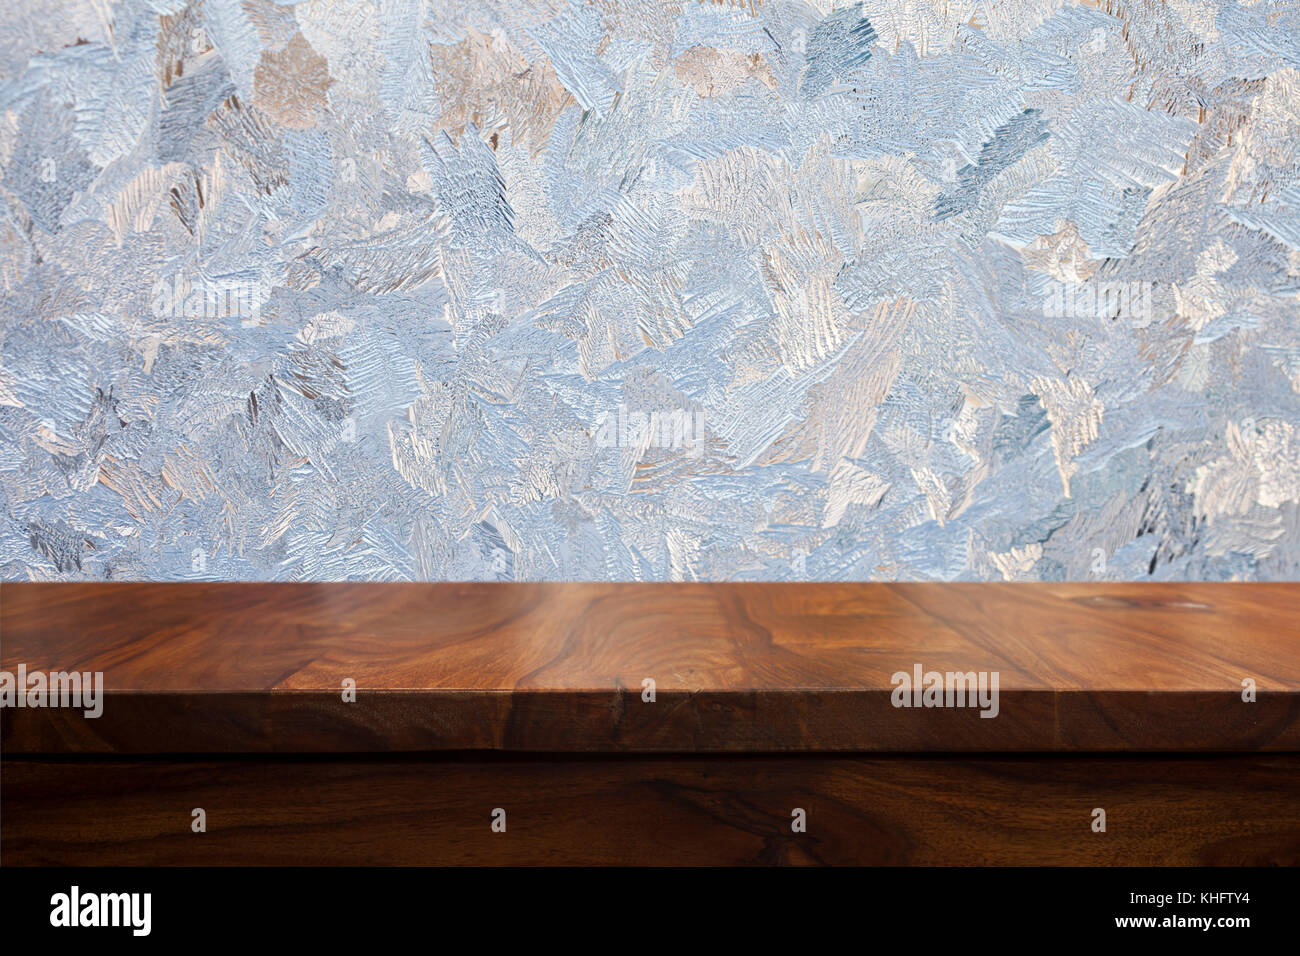 Empty top wooden table and frozen blurred background Stock Photo